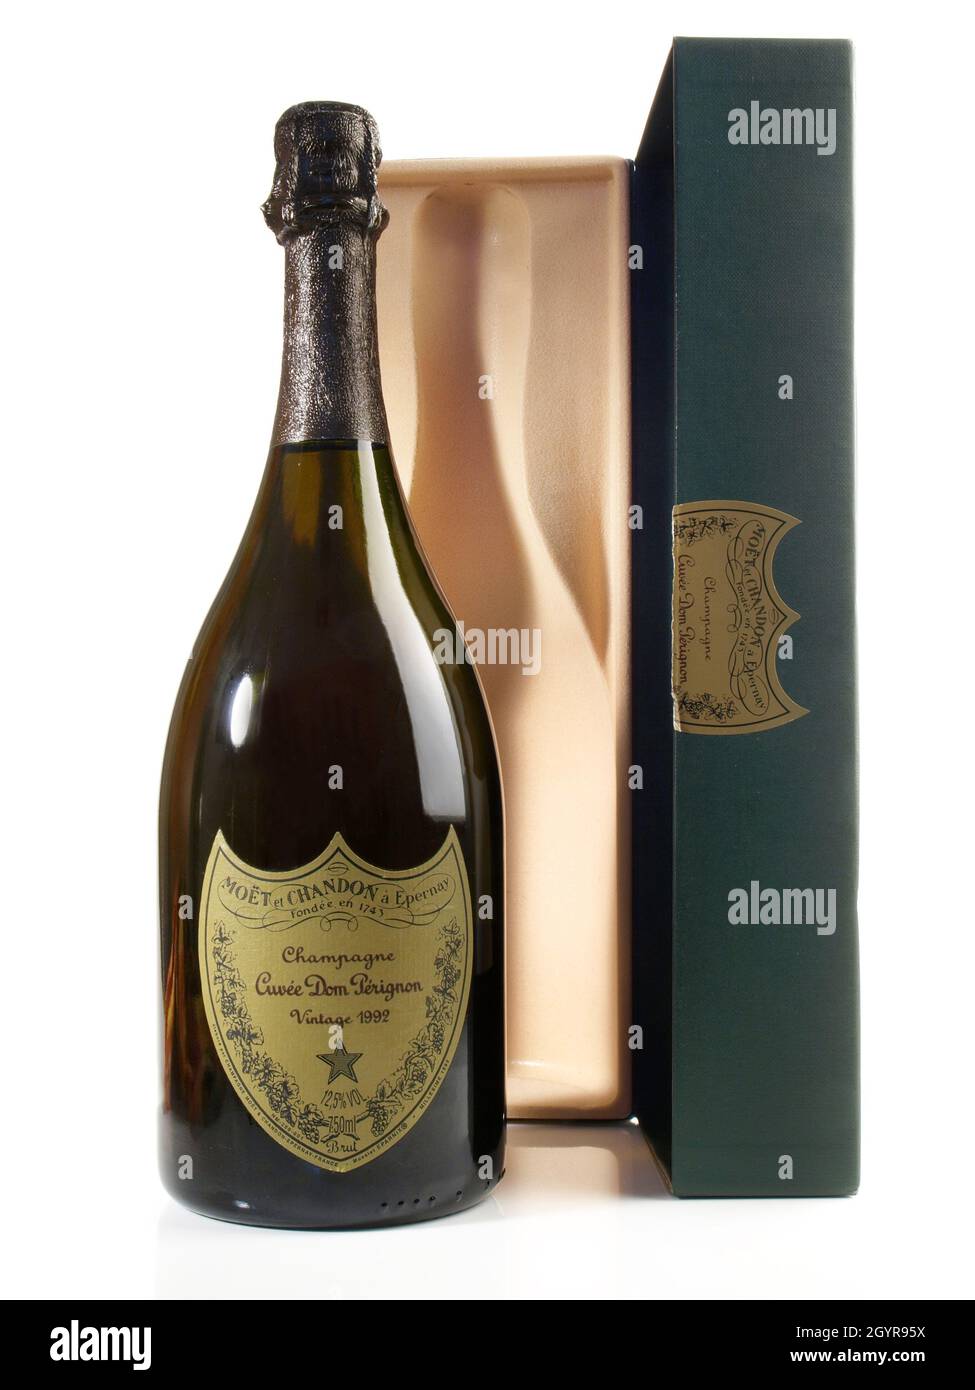 Dom Perignon Lady Gaga Vintage Rose 2006 with Gift Box - Old Town